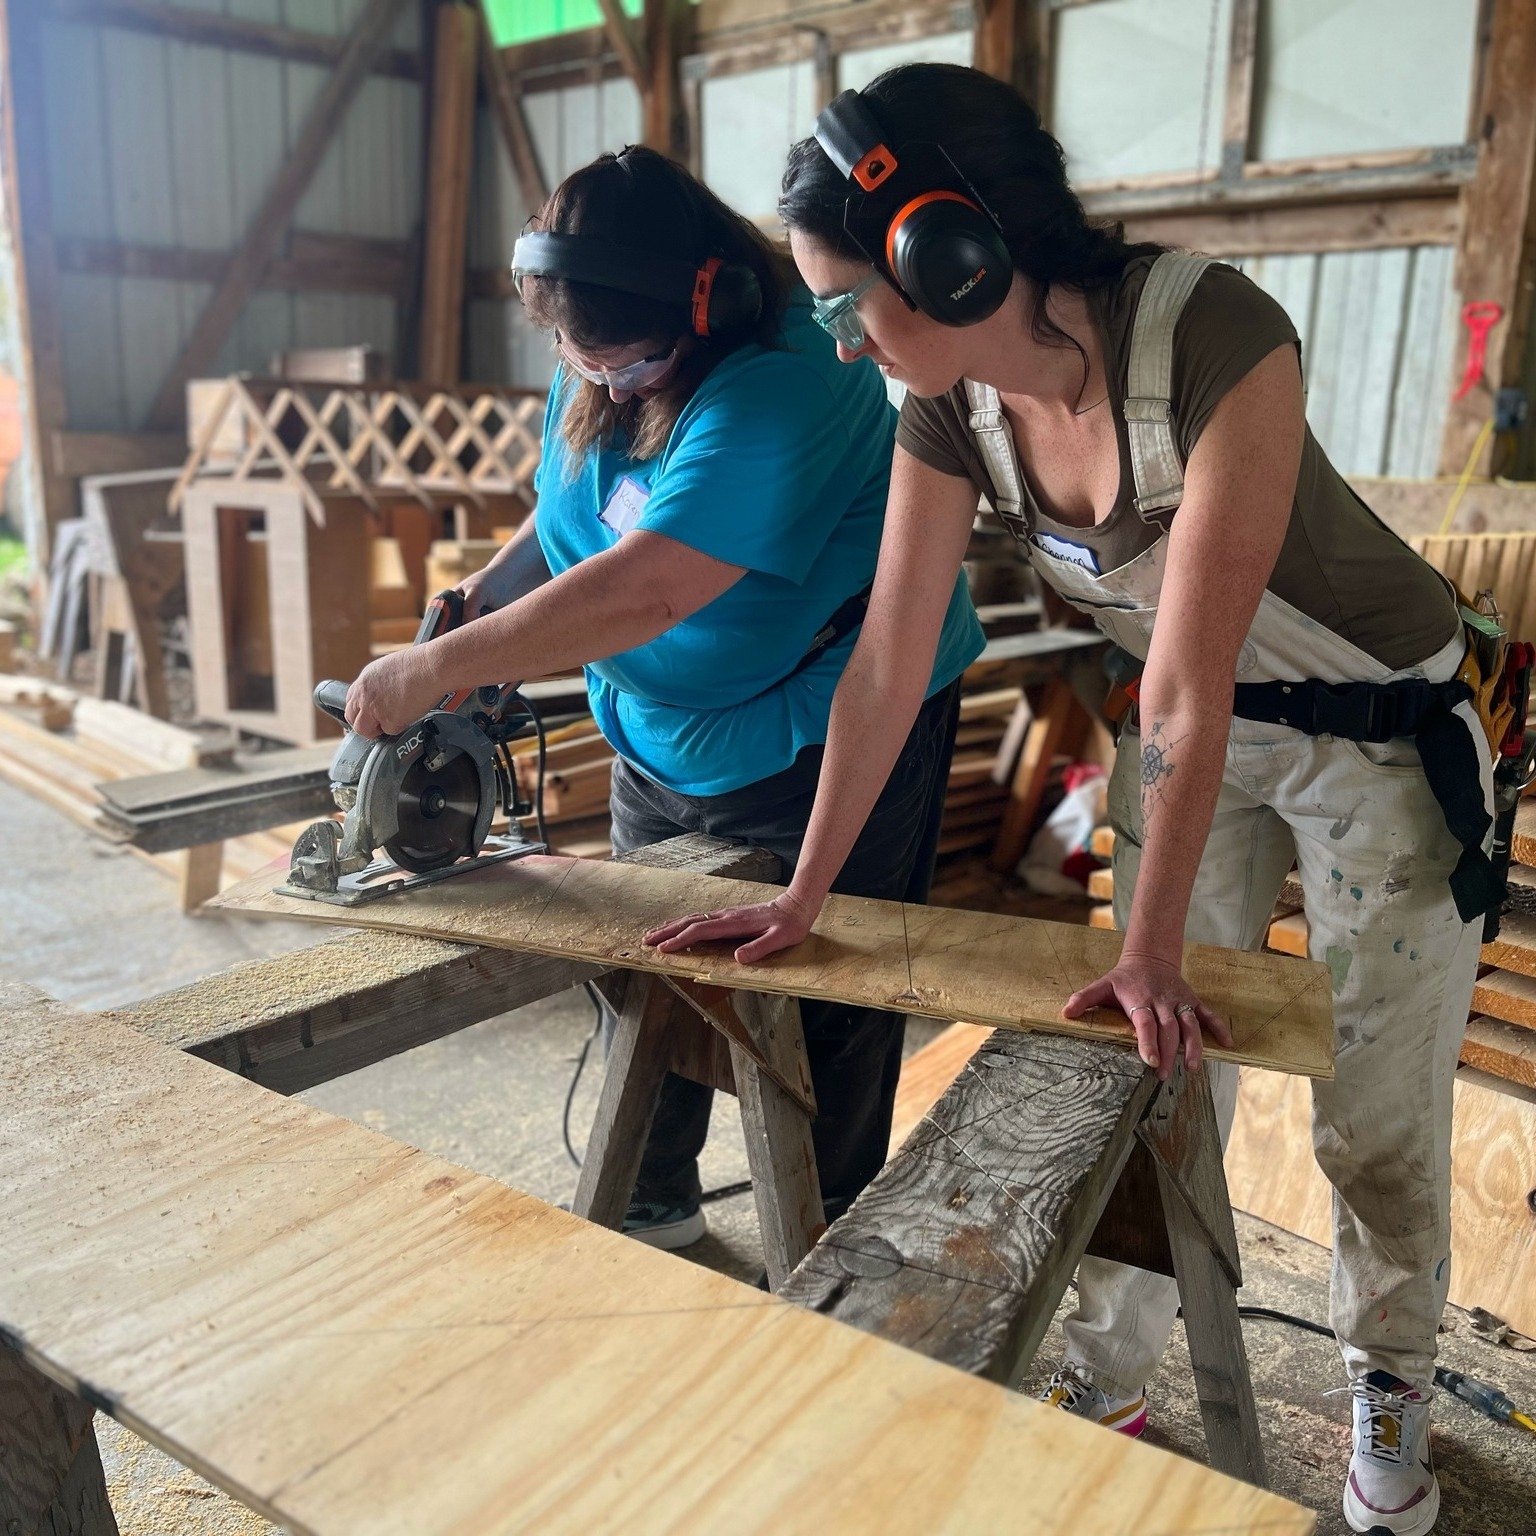 Seeing moms and daughters learn carpentry together is always a beautiful thing. Happy Mother's Day, everyone! ❤️

#carpentryforwomen #mothersday #builtbyhand #keepcraftalive #ithaca #trumansburg